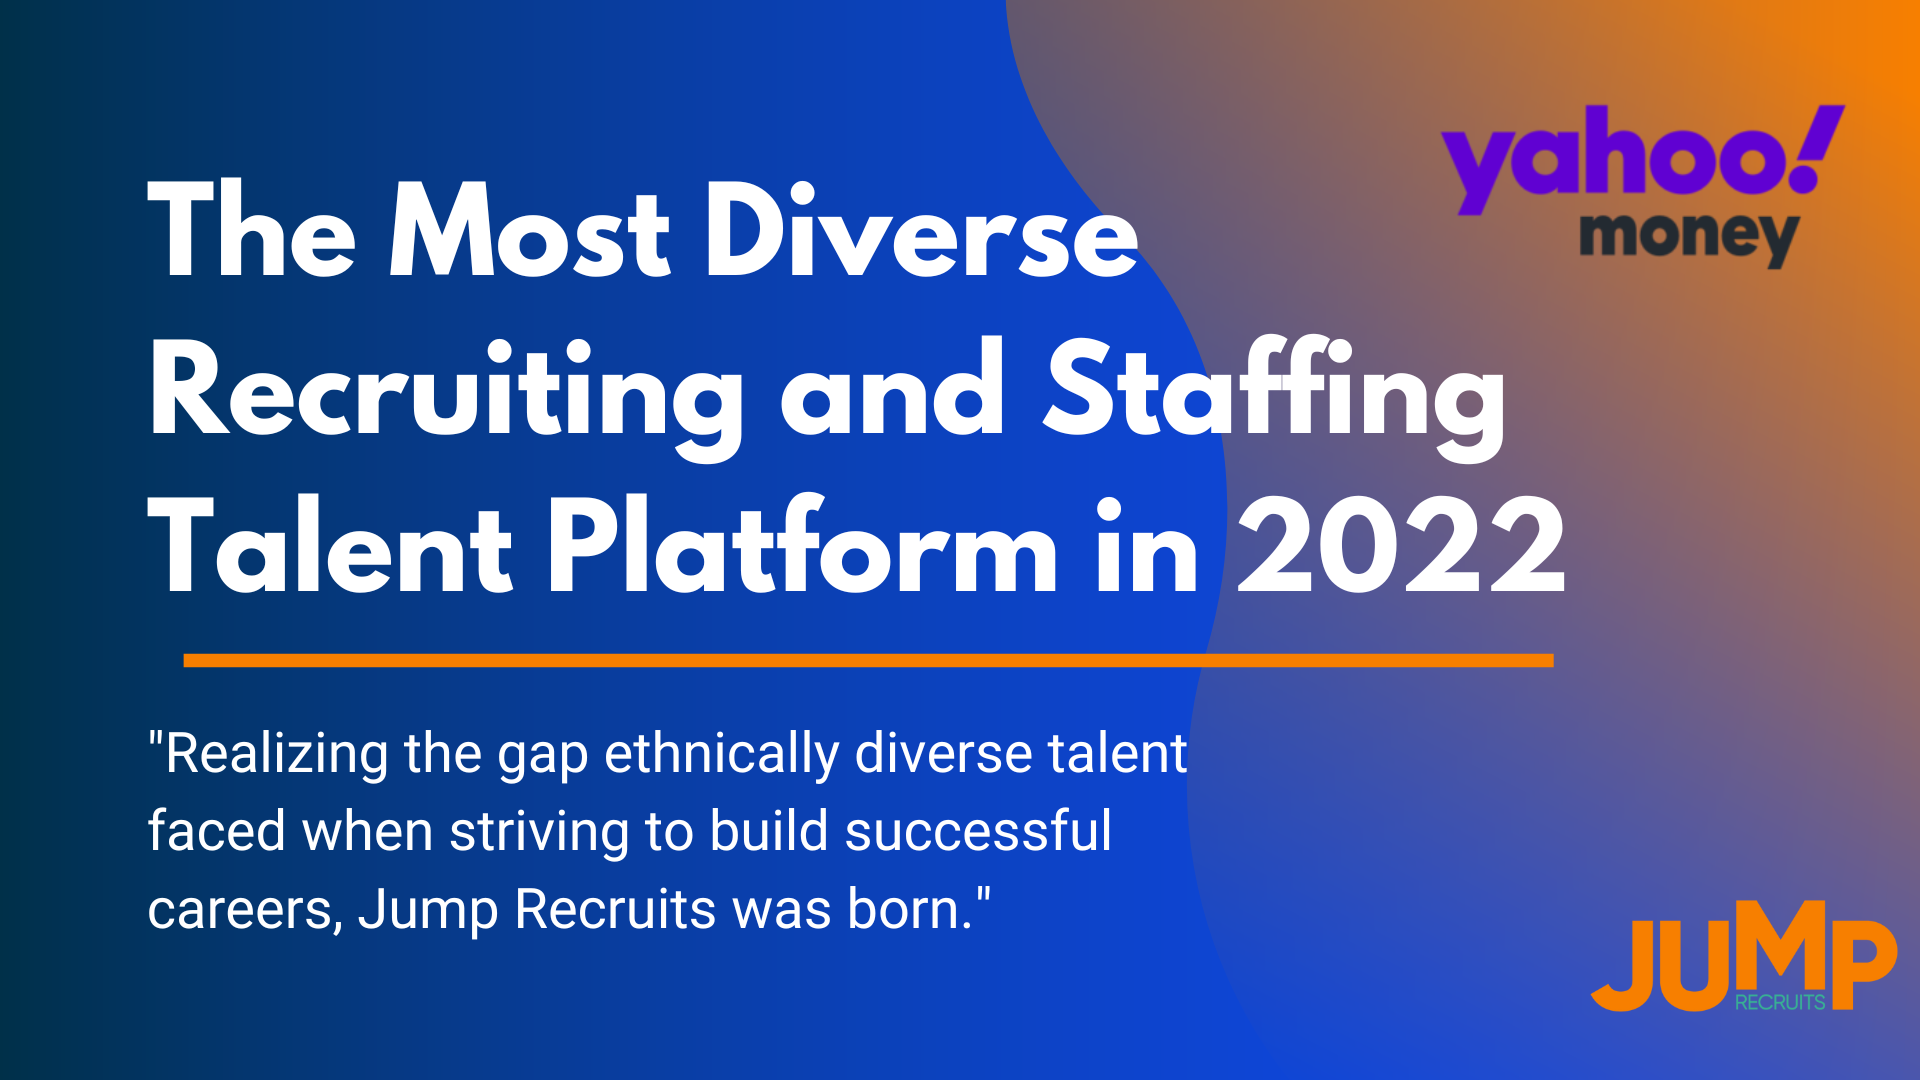 Black Business Month Features Jump Recruits, the Most Diverse Recruiting and Staffing Talent Platform in 2022